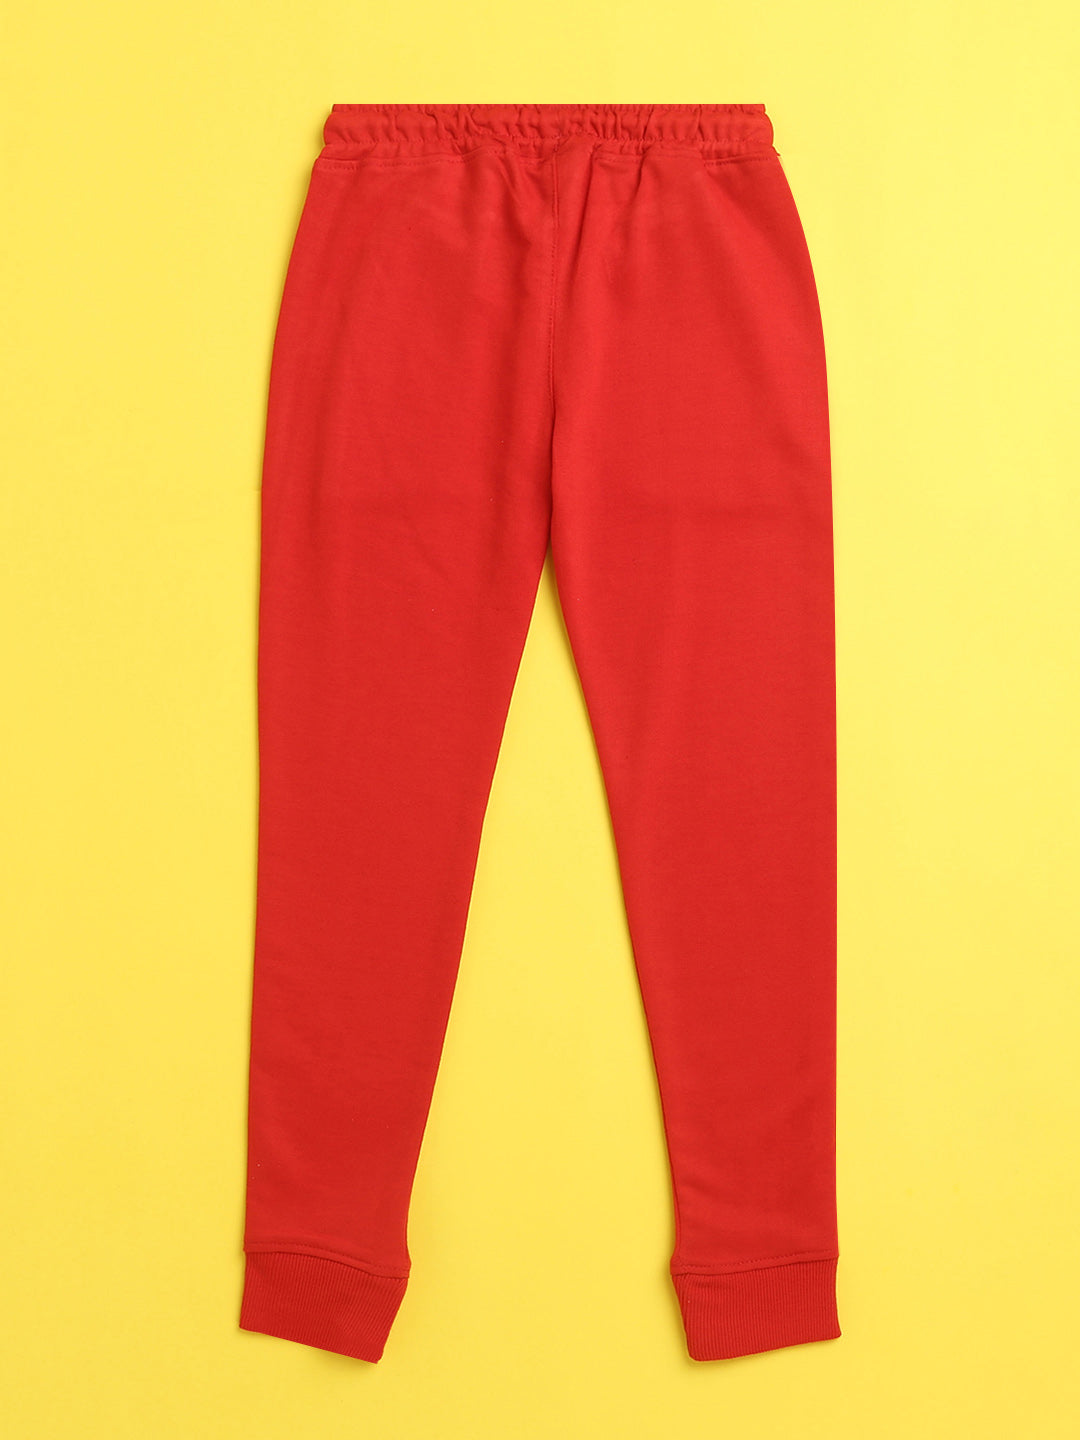 Nusyl Red solid color kids unisex treck pants